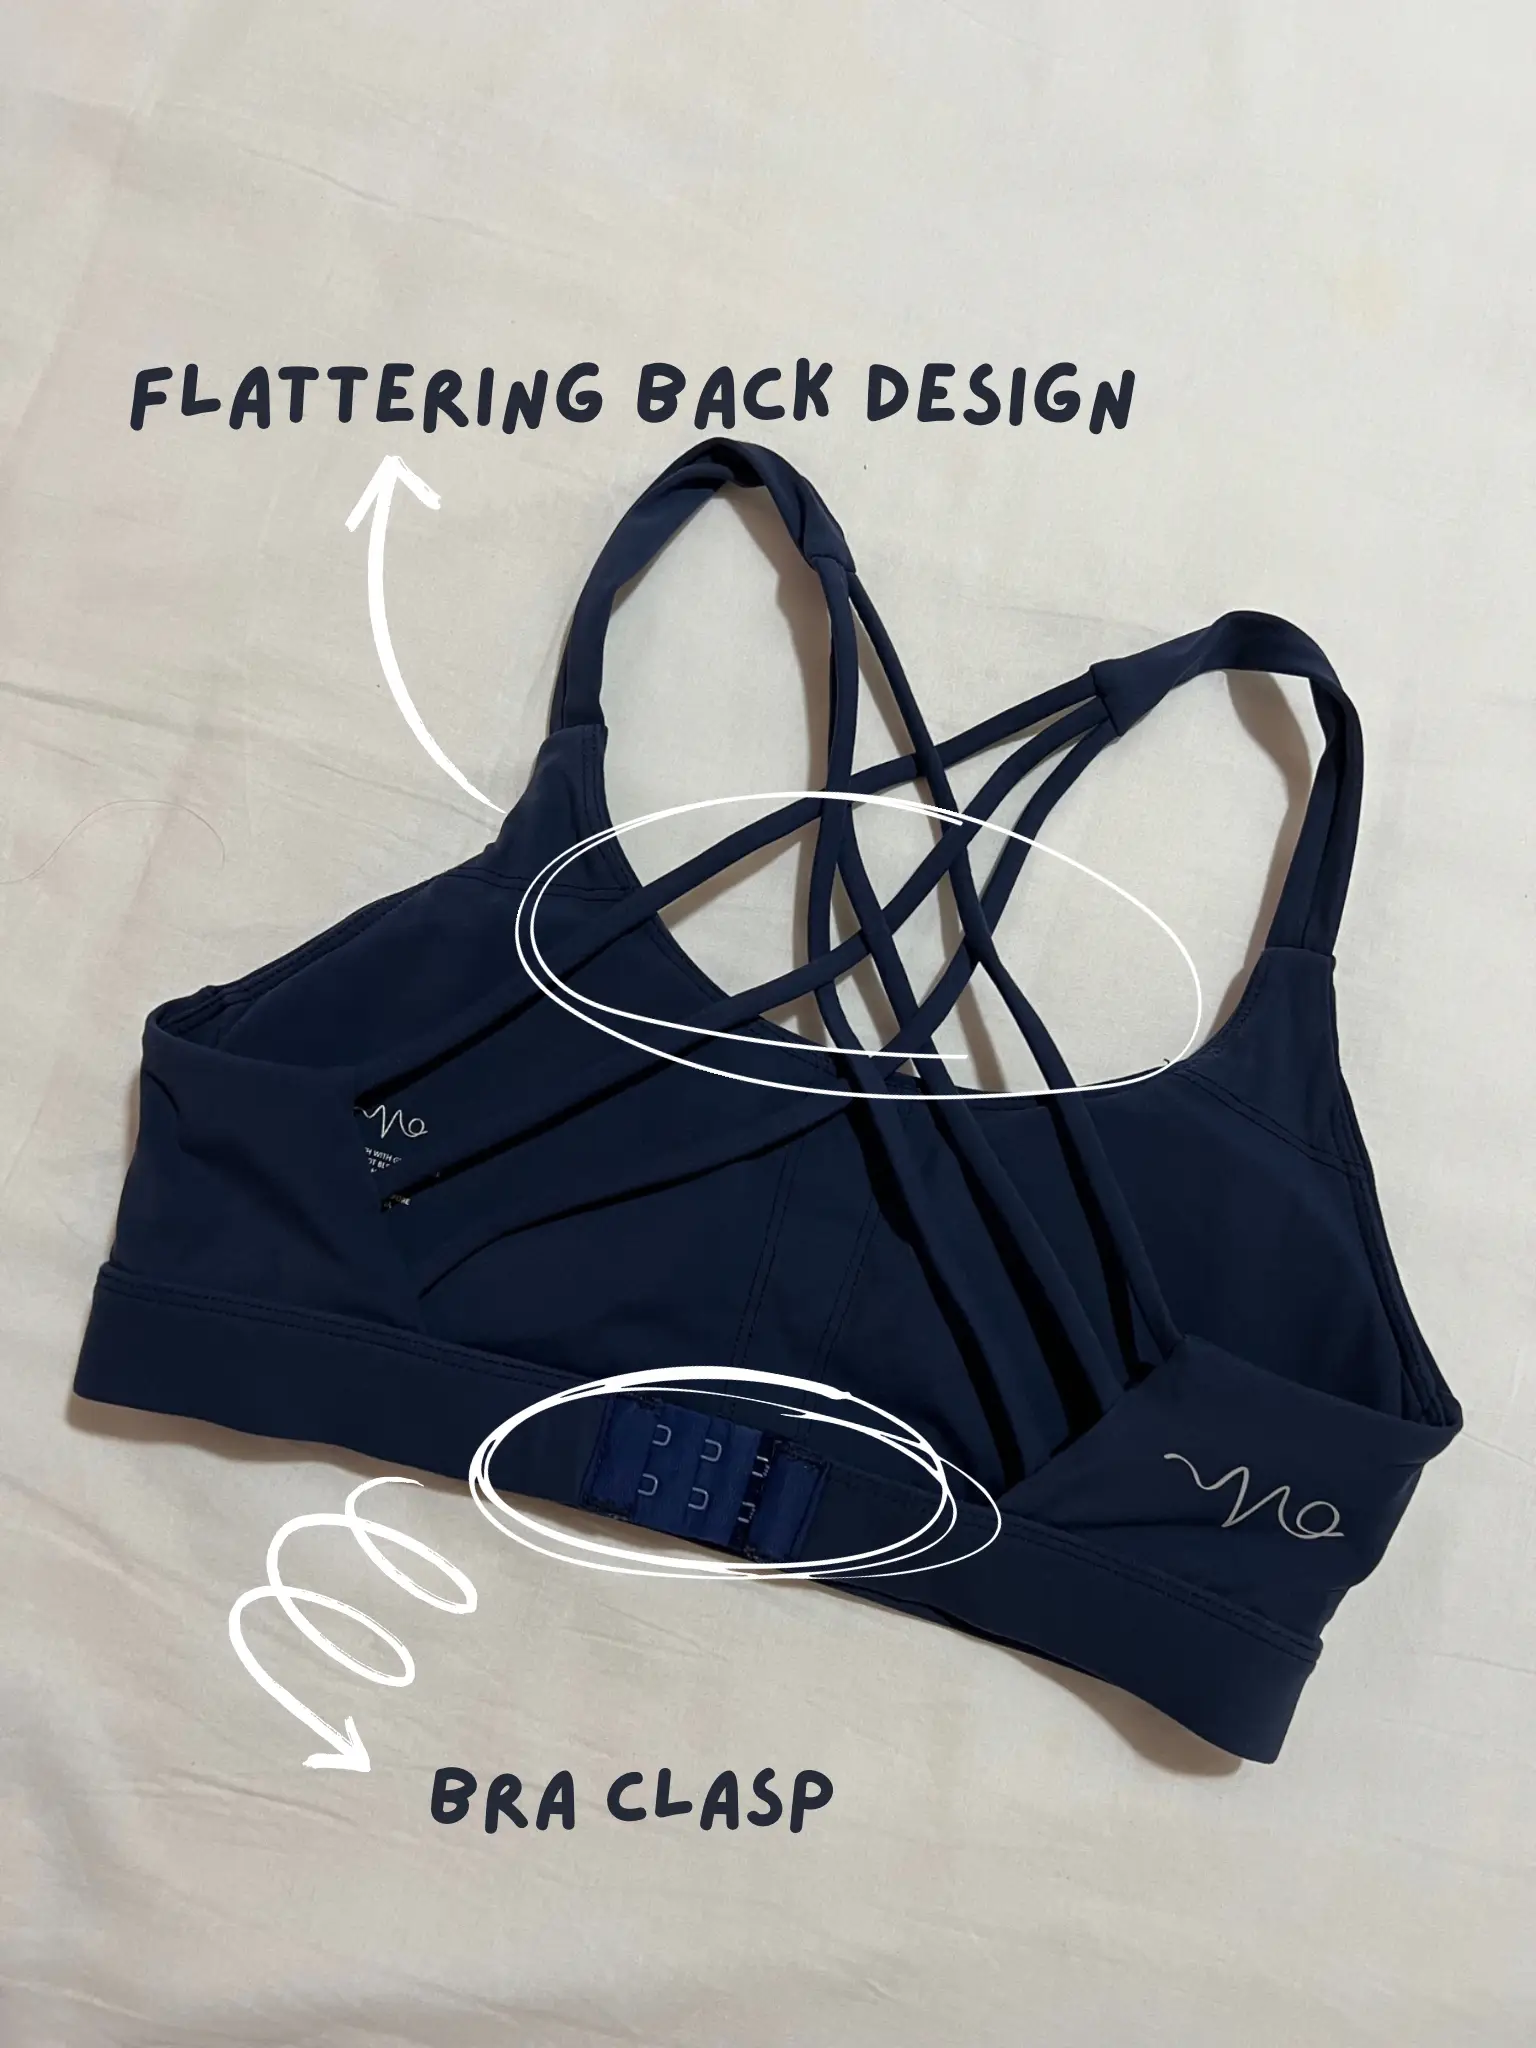 Best sports bra for girls with broad shoulders! 🫶🏻, Gallery posted by  char